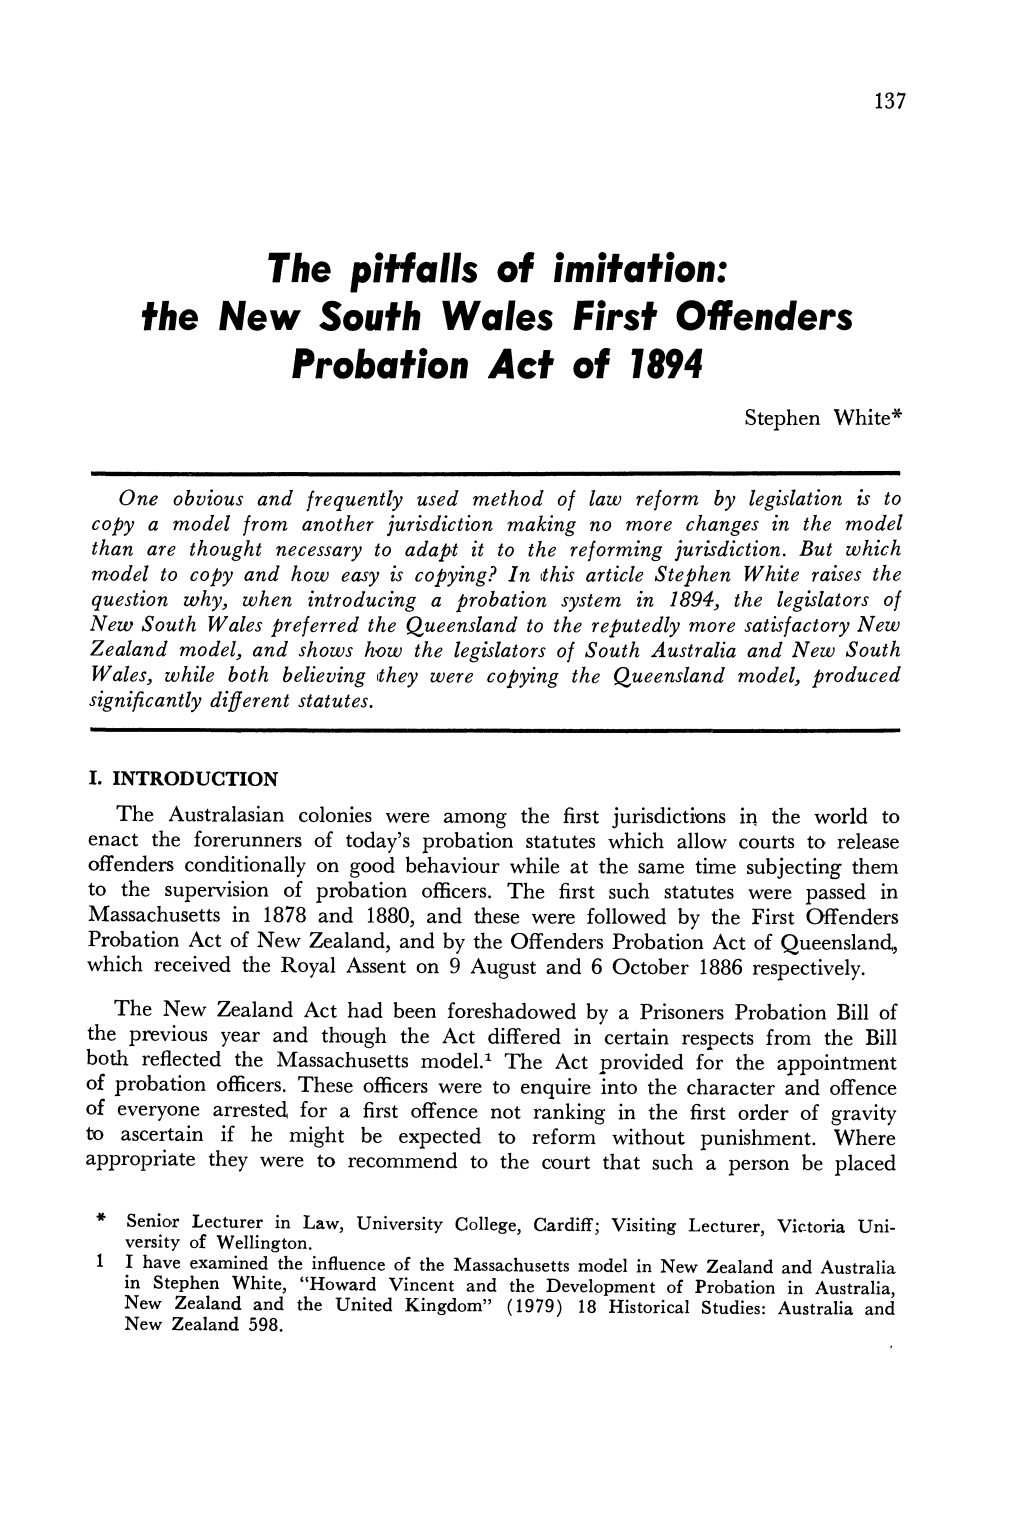 The New South Wales First Offenders Probation Act of 1894 Stephen White*